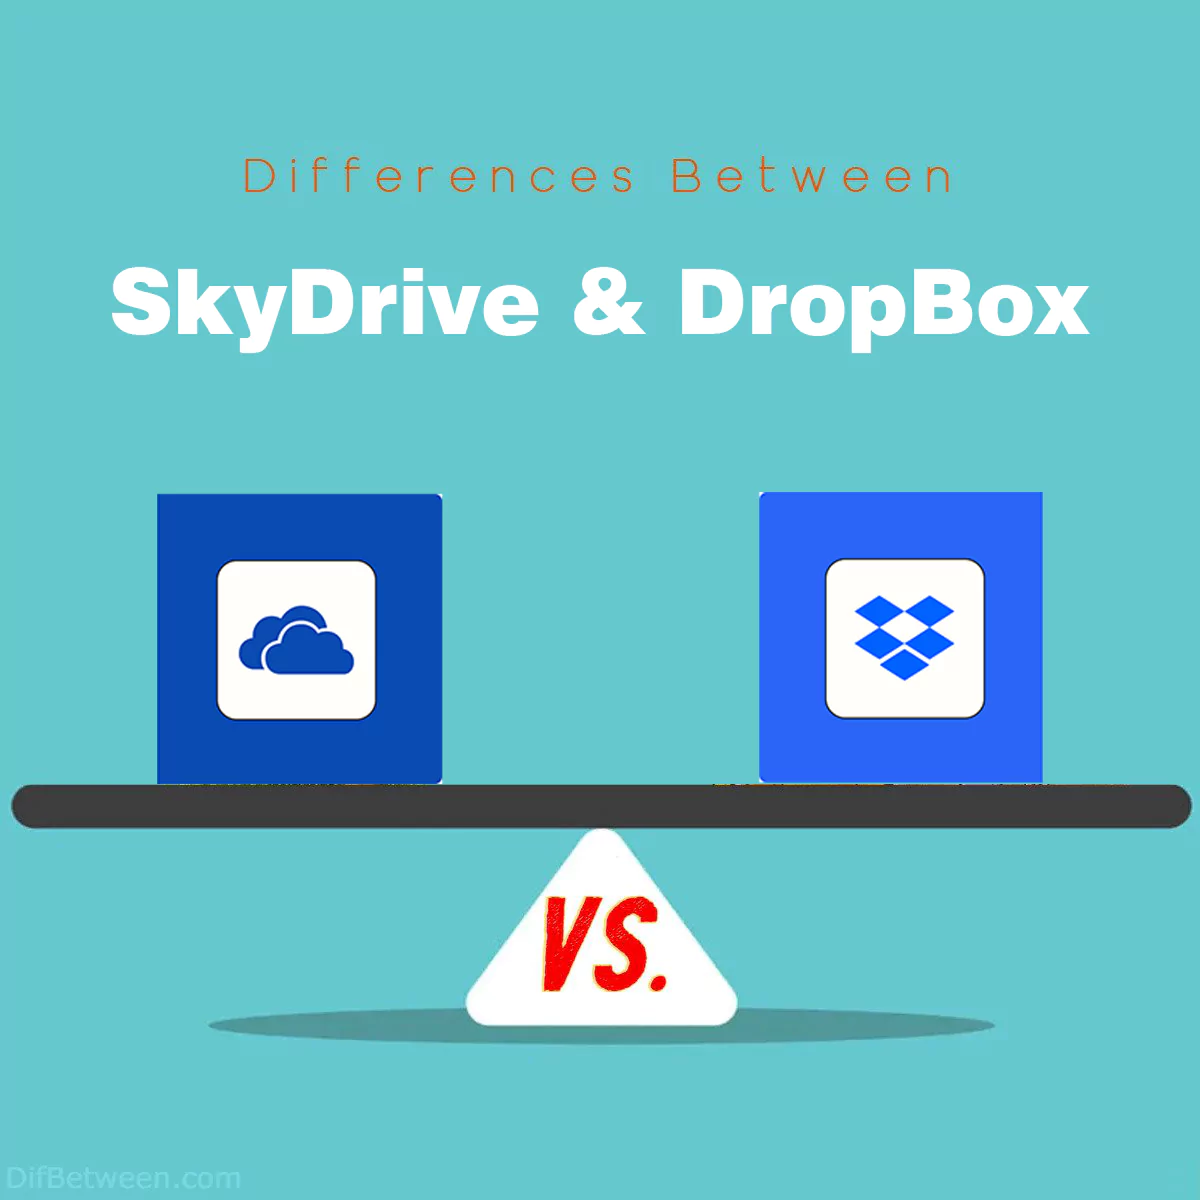 Differences Between SkyDrive and DropBox